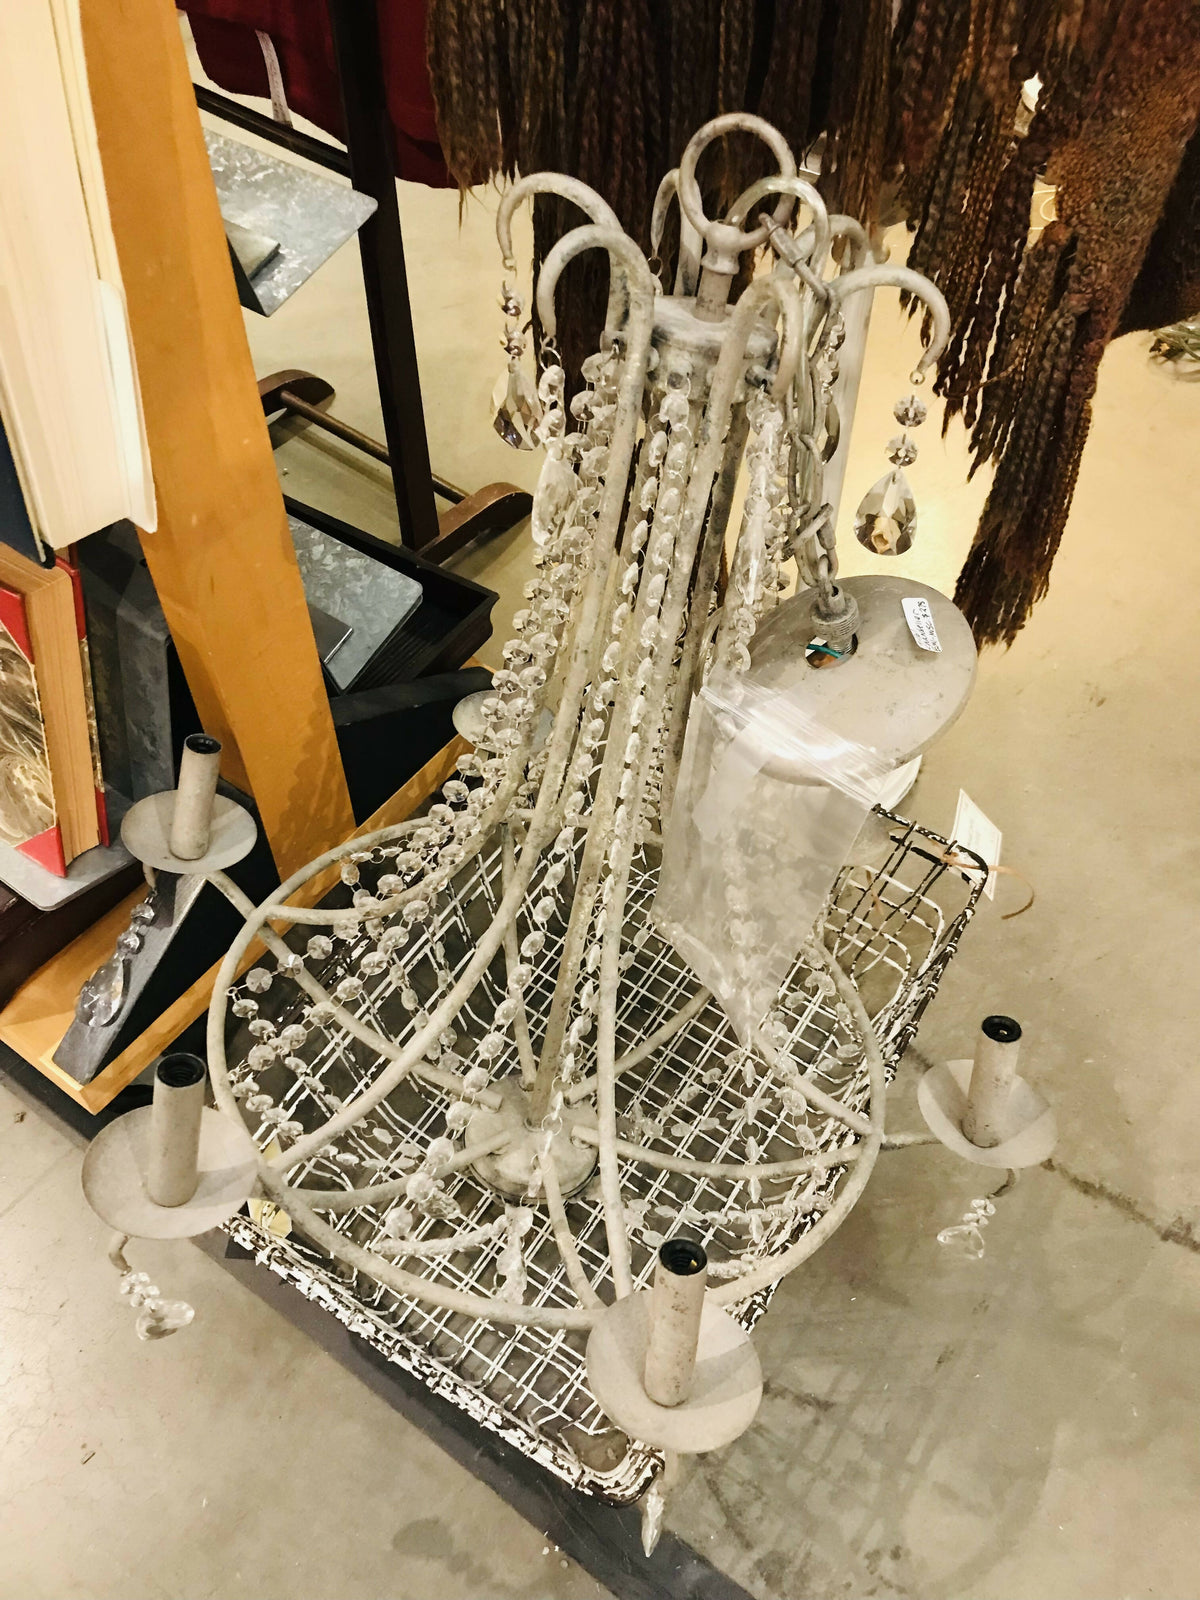 Glass and Metal Chandelier